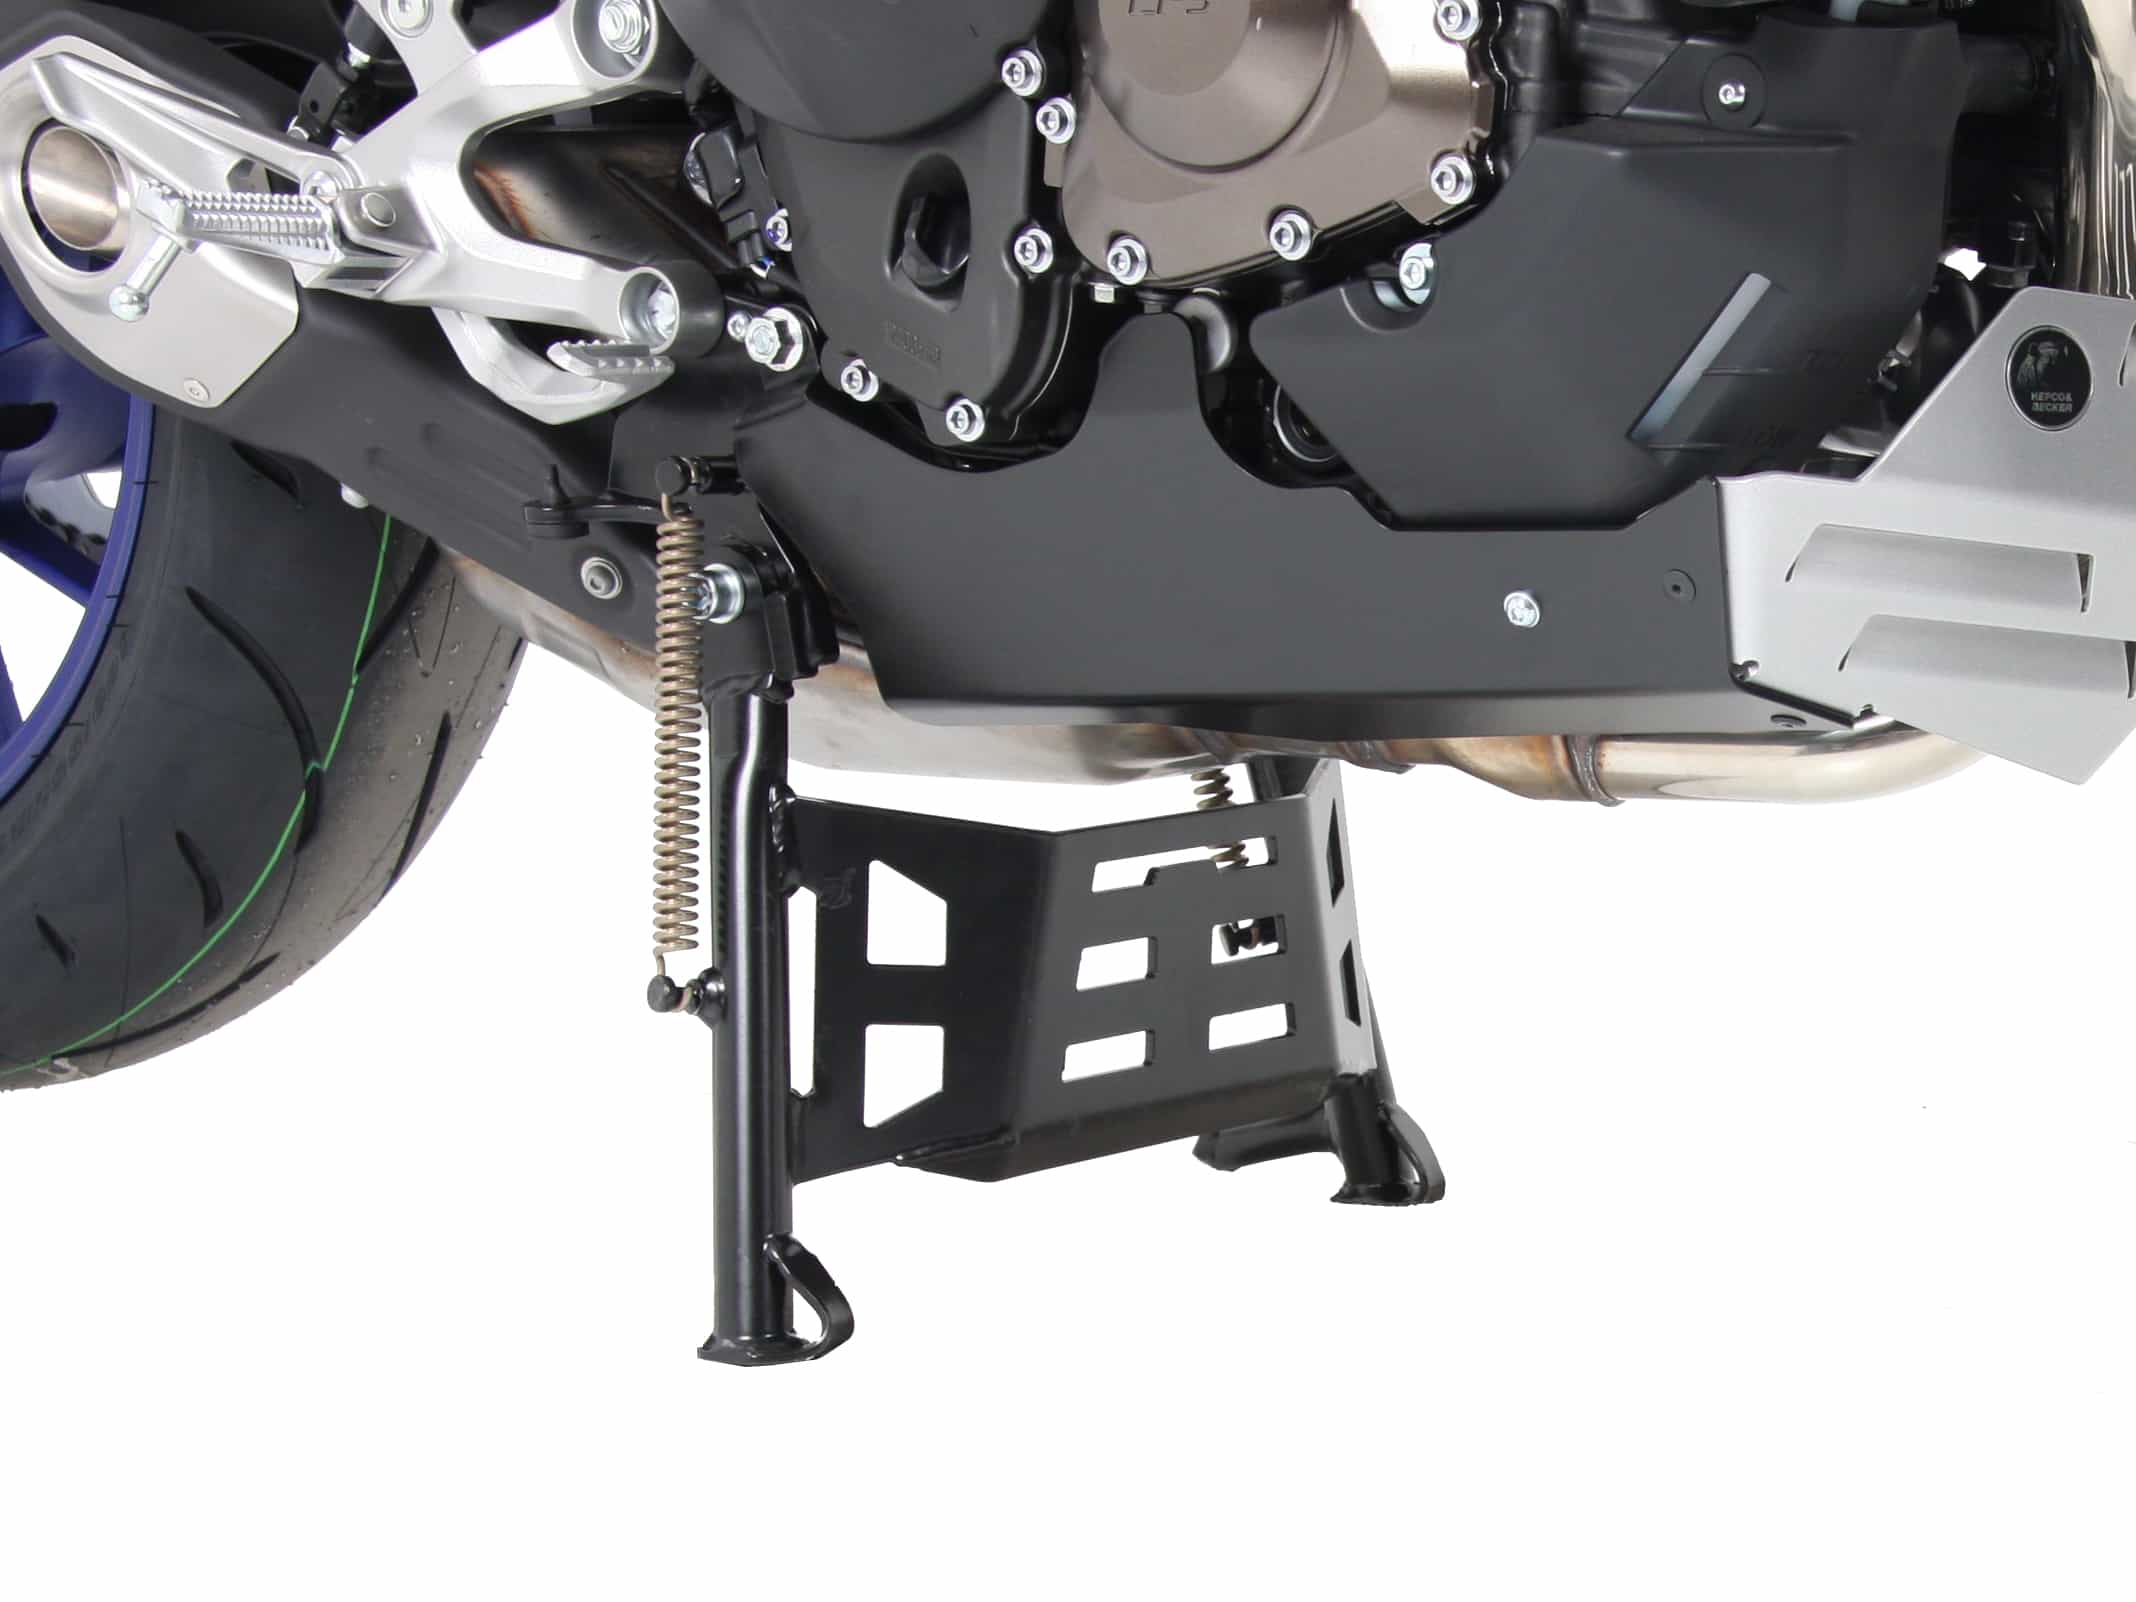 Center stand for Yamaha MT-09 (2017-2020)